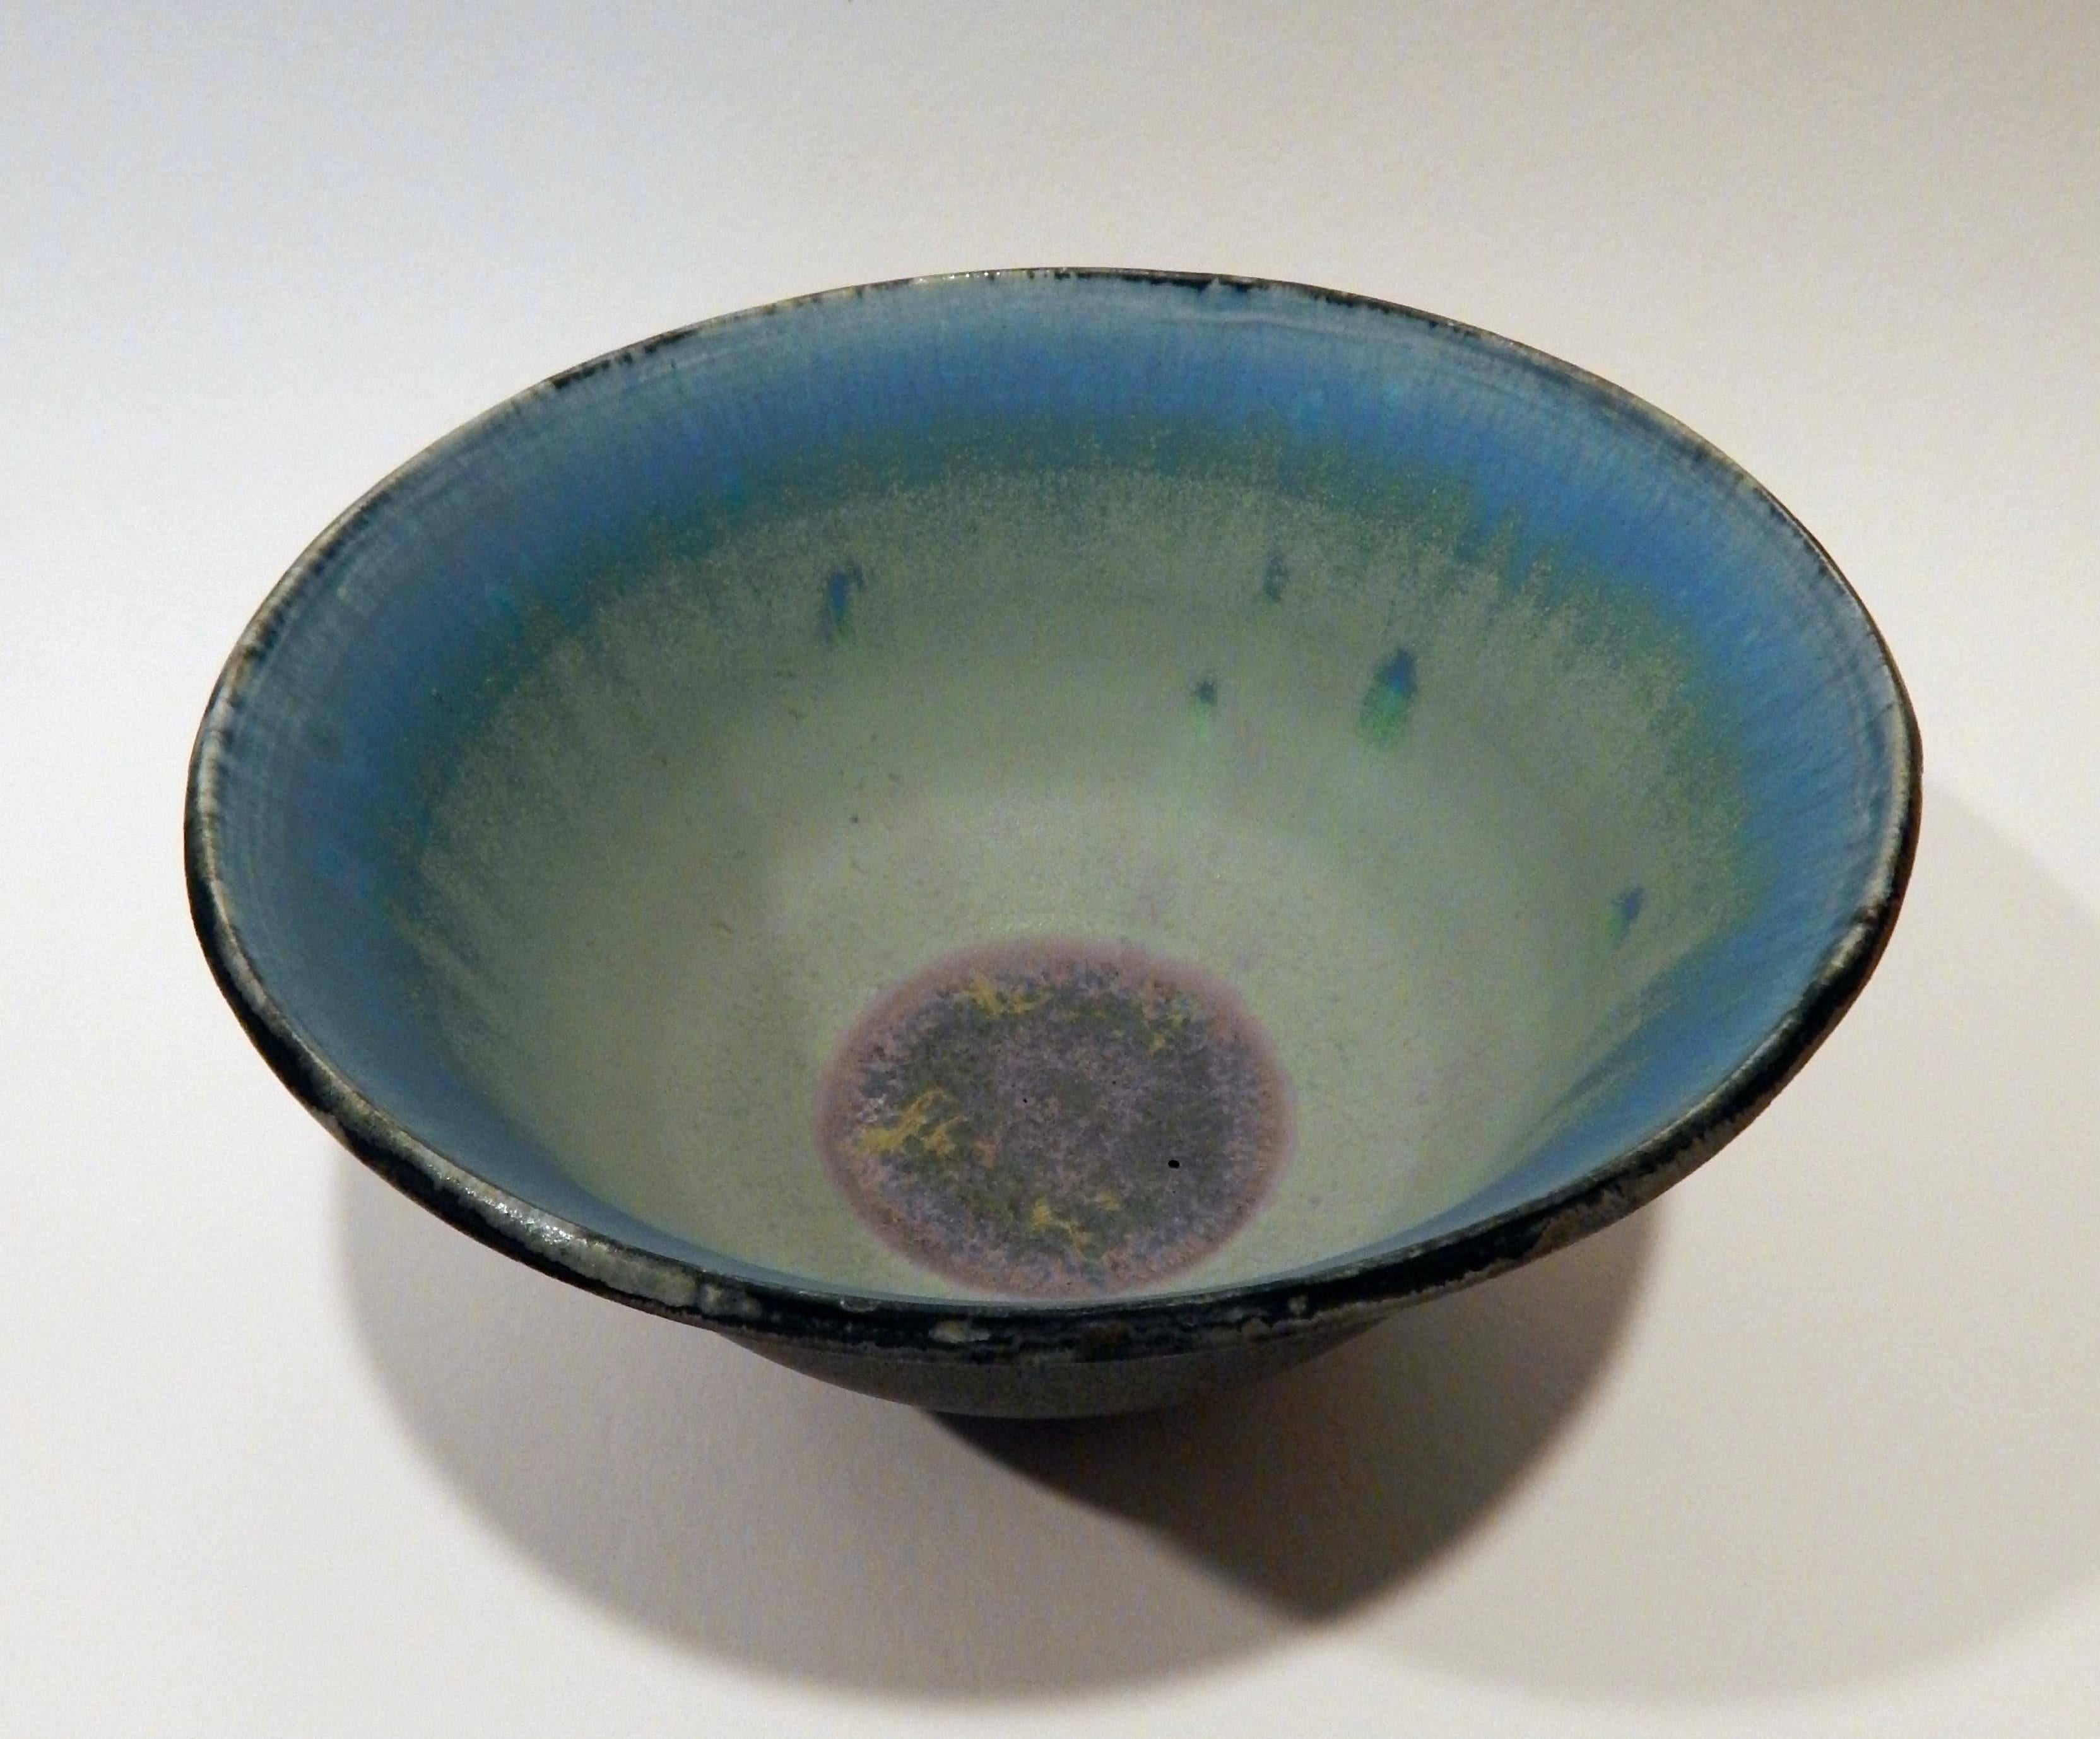 This rose Cabat flared ceramic bowl bears an
exterior glaze of bluish grey with
large drips showing near the base.
The interior glaze is two shades of turquoise
fading to a mauve centre.
Measures: 4.5